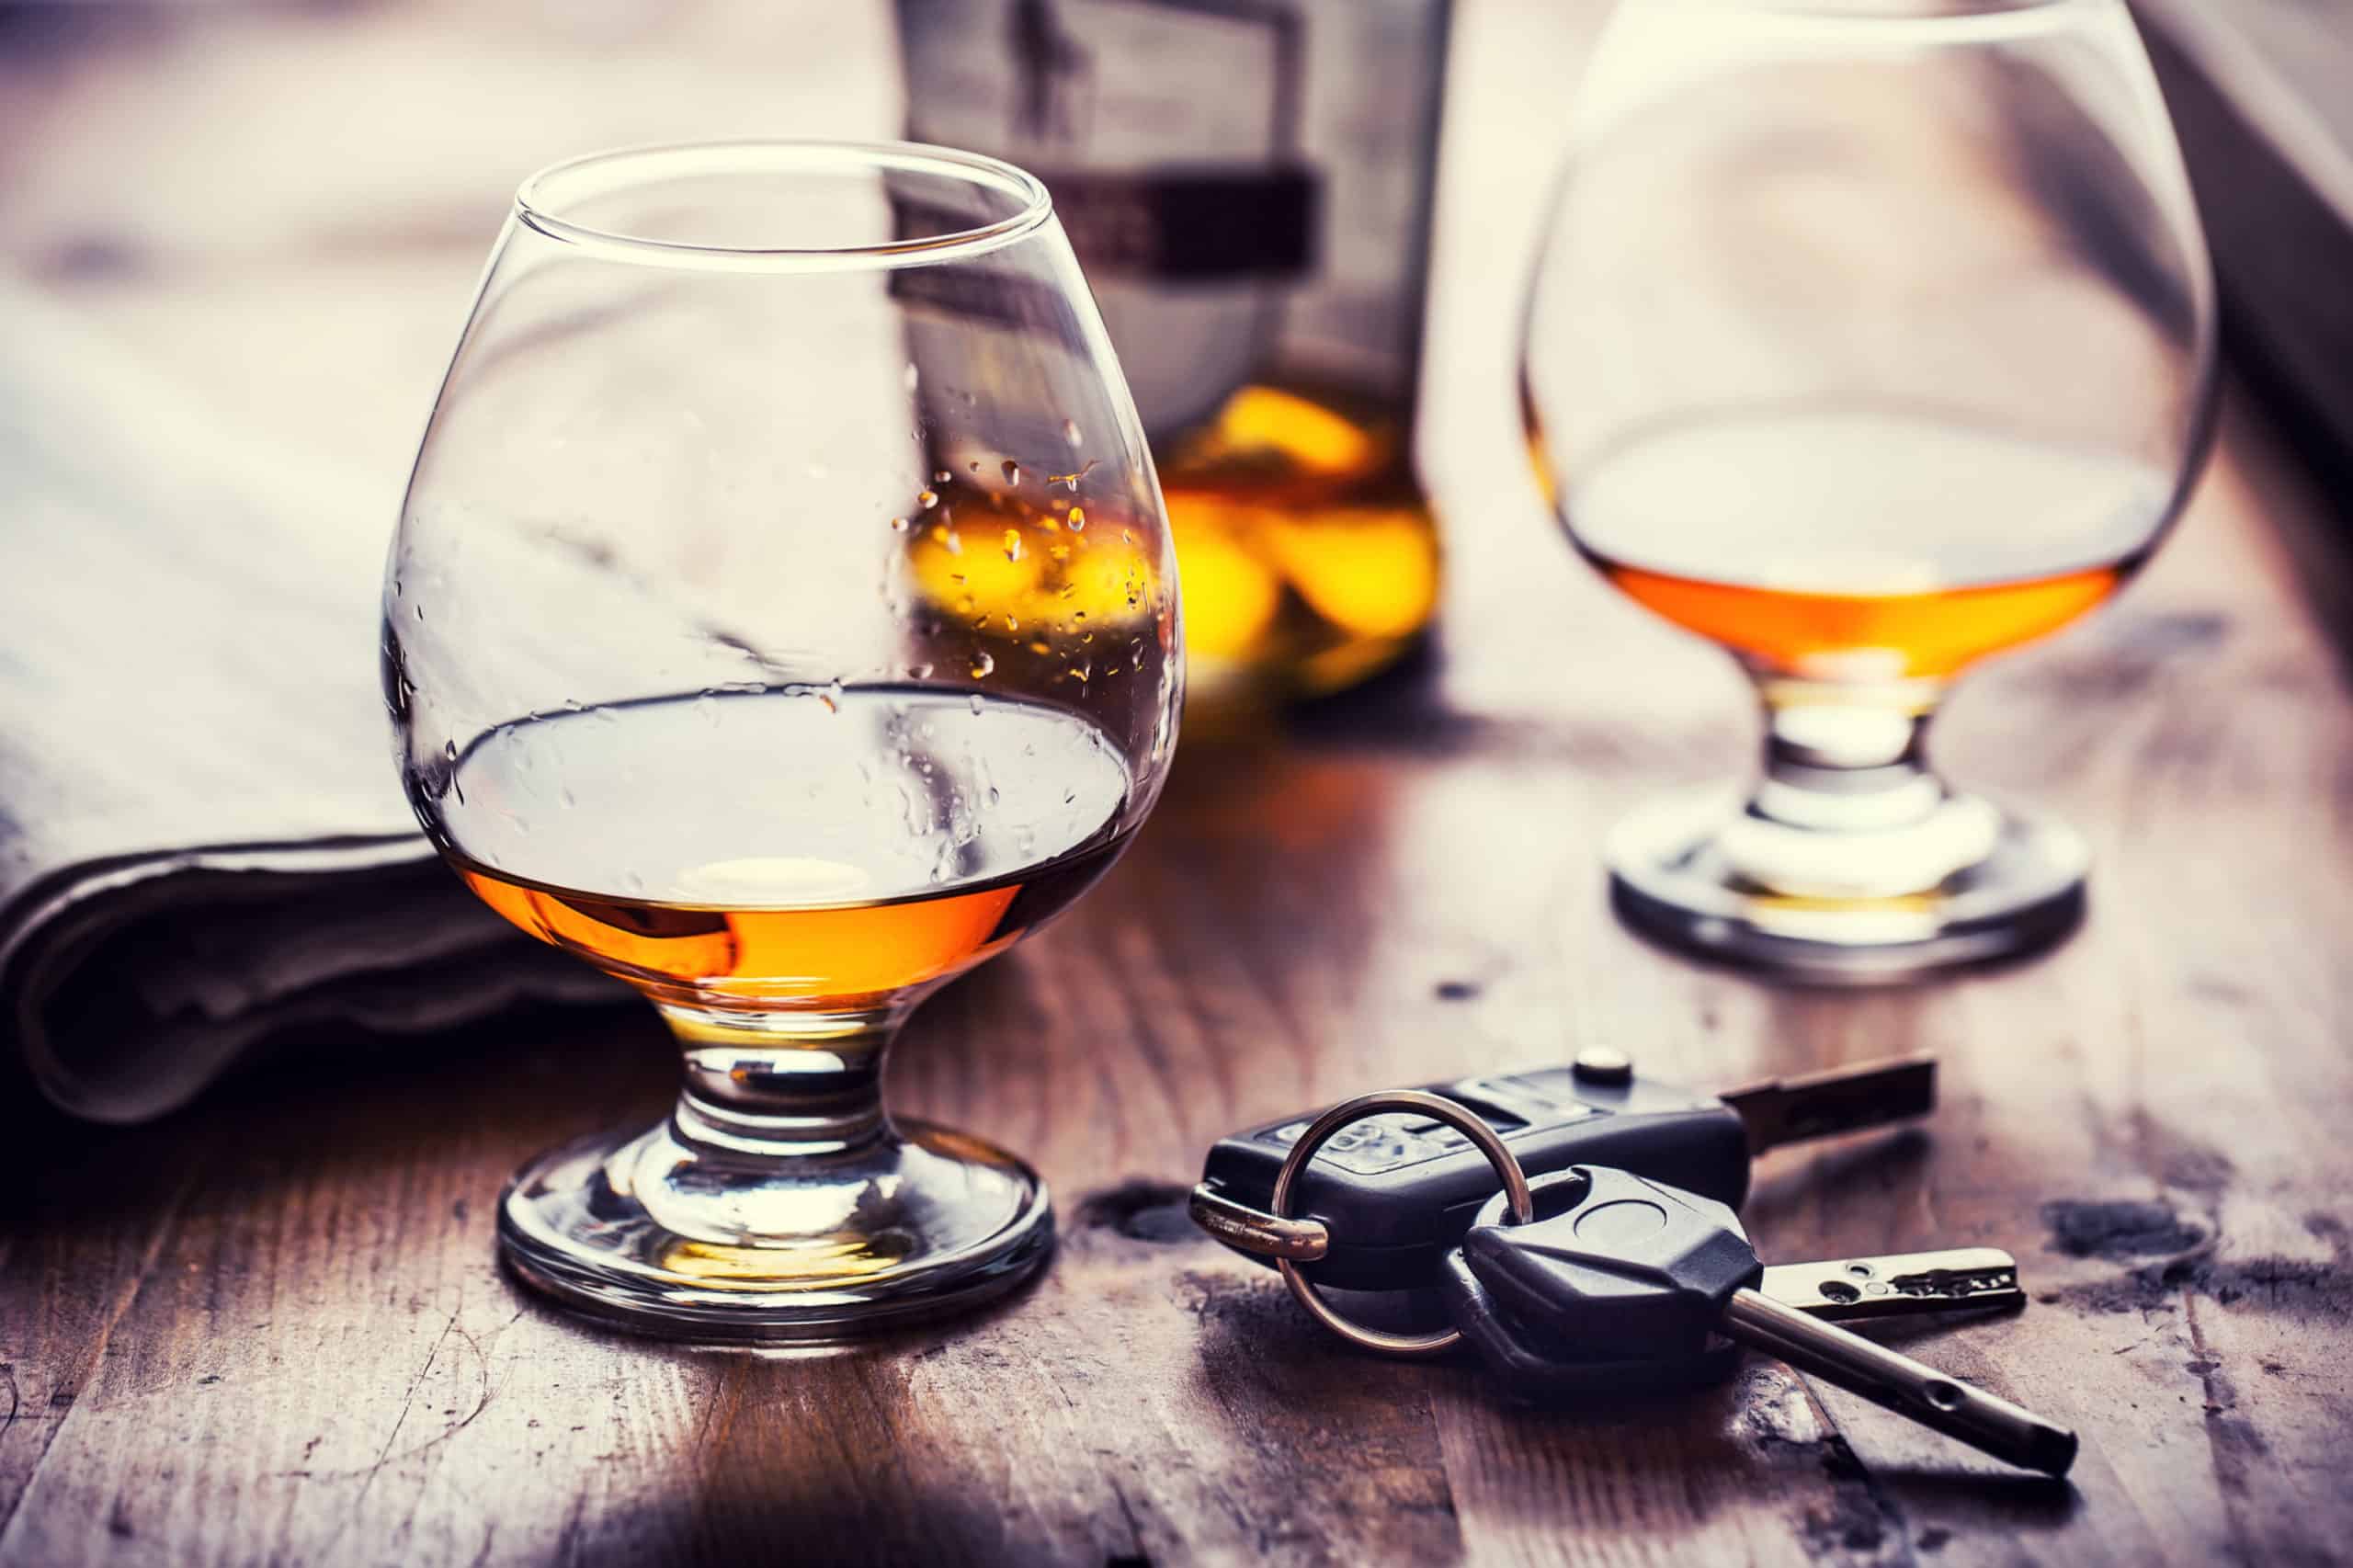 Two Glasses Containing Alcohol With Car Keys on a Table